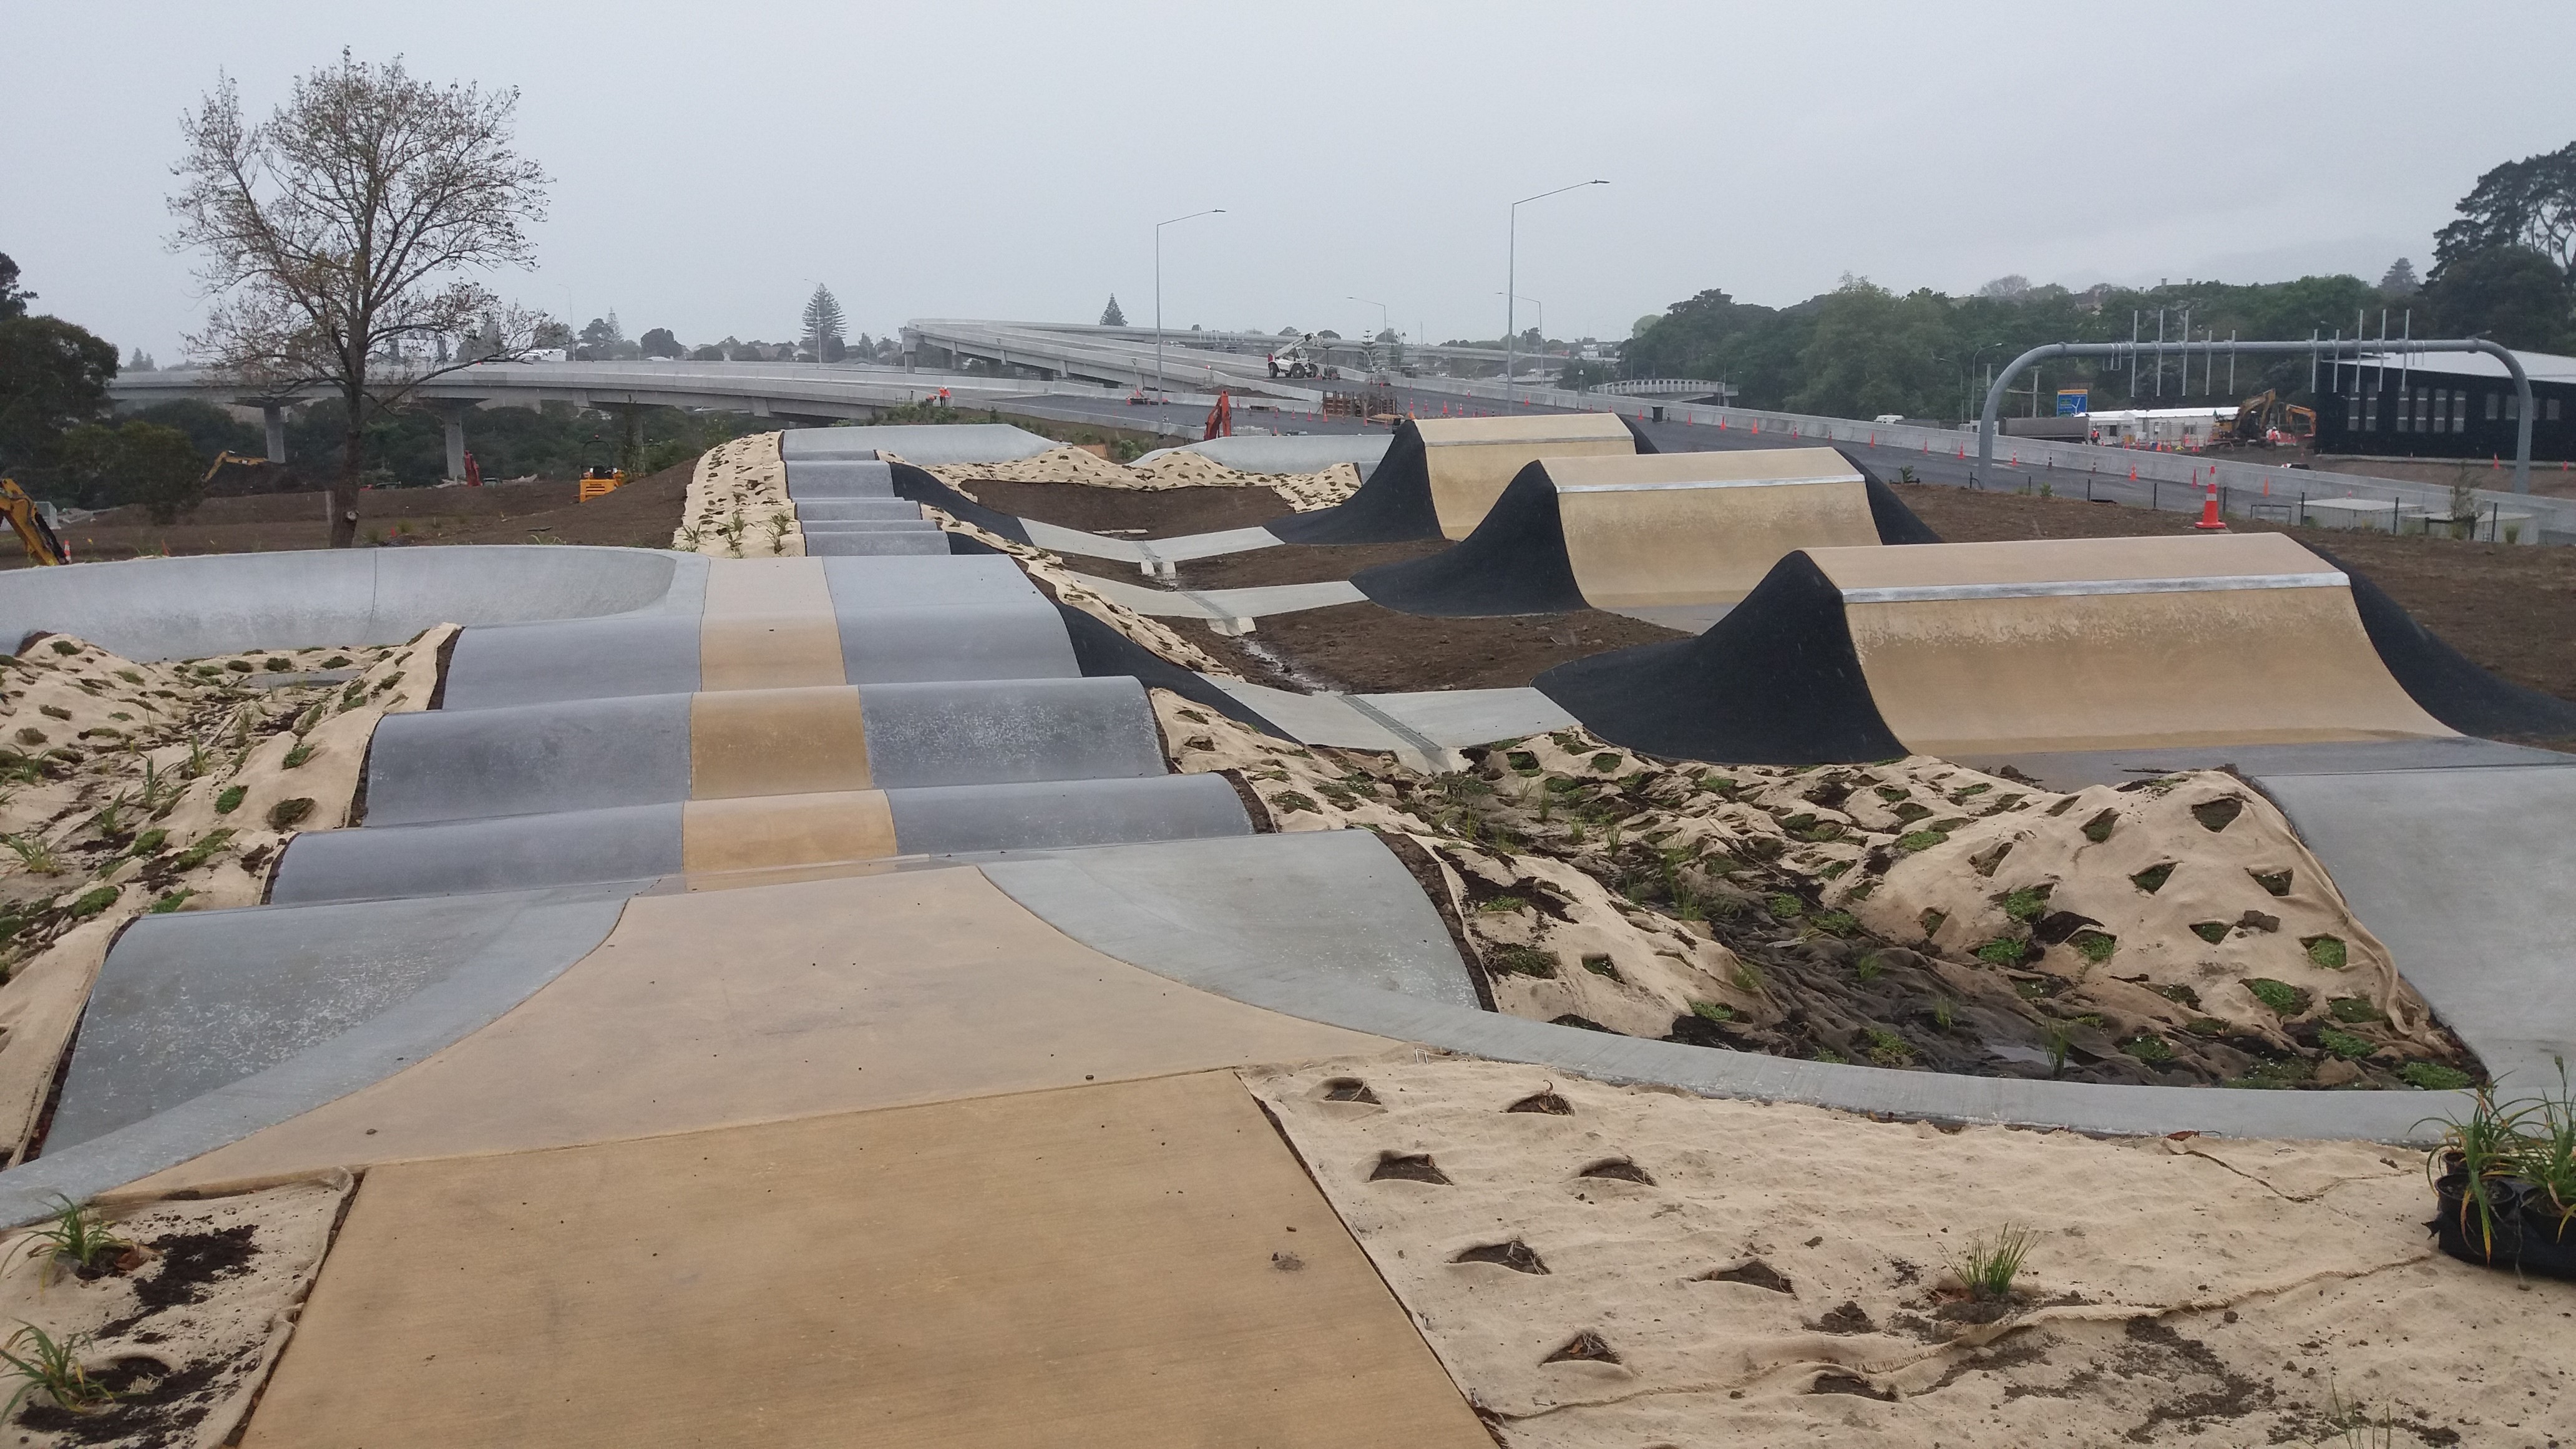 World class BMX track … smooth and fast Image